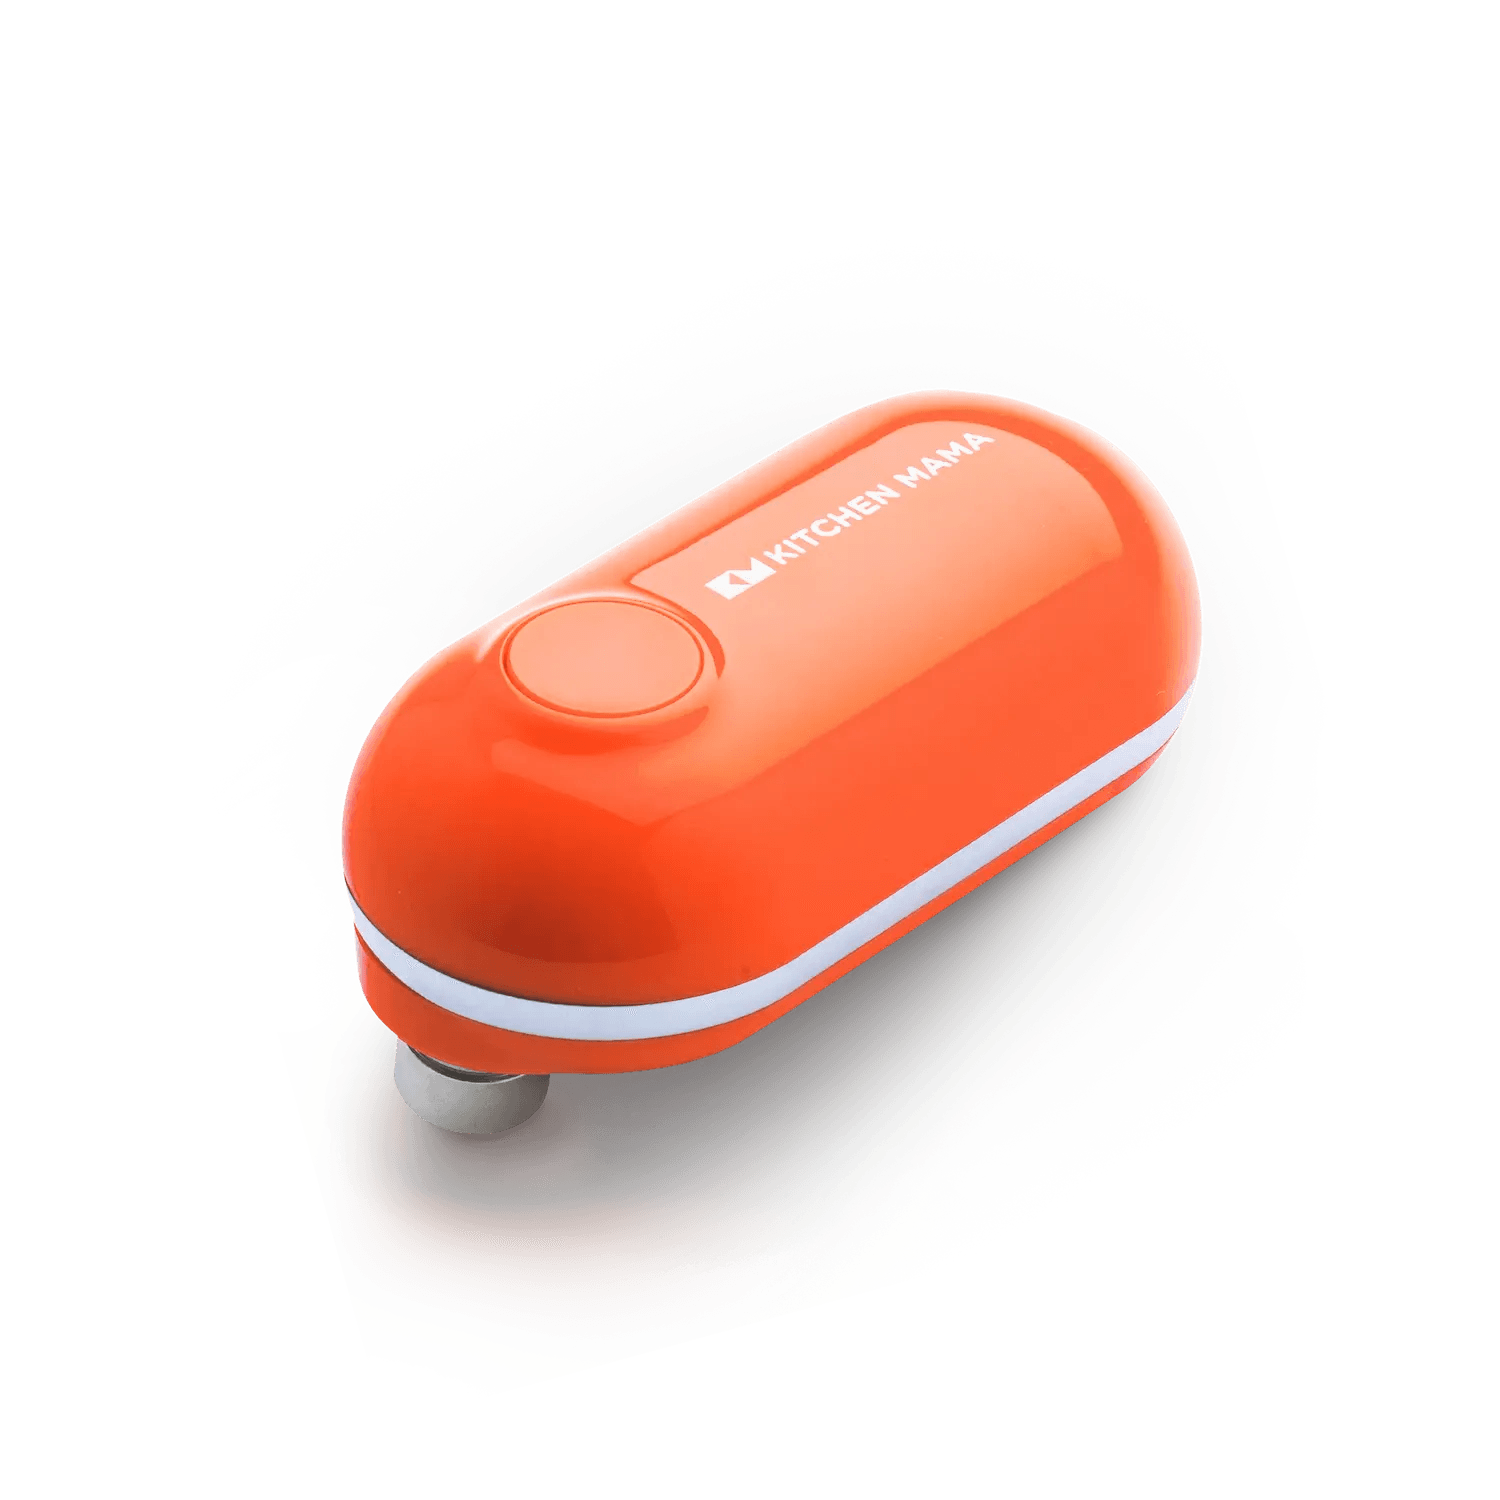 Mini Electric Can Opener - The Smallest Electric Can Opener, Orange, CO1200-O, battery operated can opener, electric can openers for kitchen, orange electric can opener, can openers prime for seniors with arthritis, portable can opener, space saver can opener